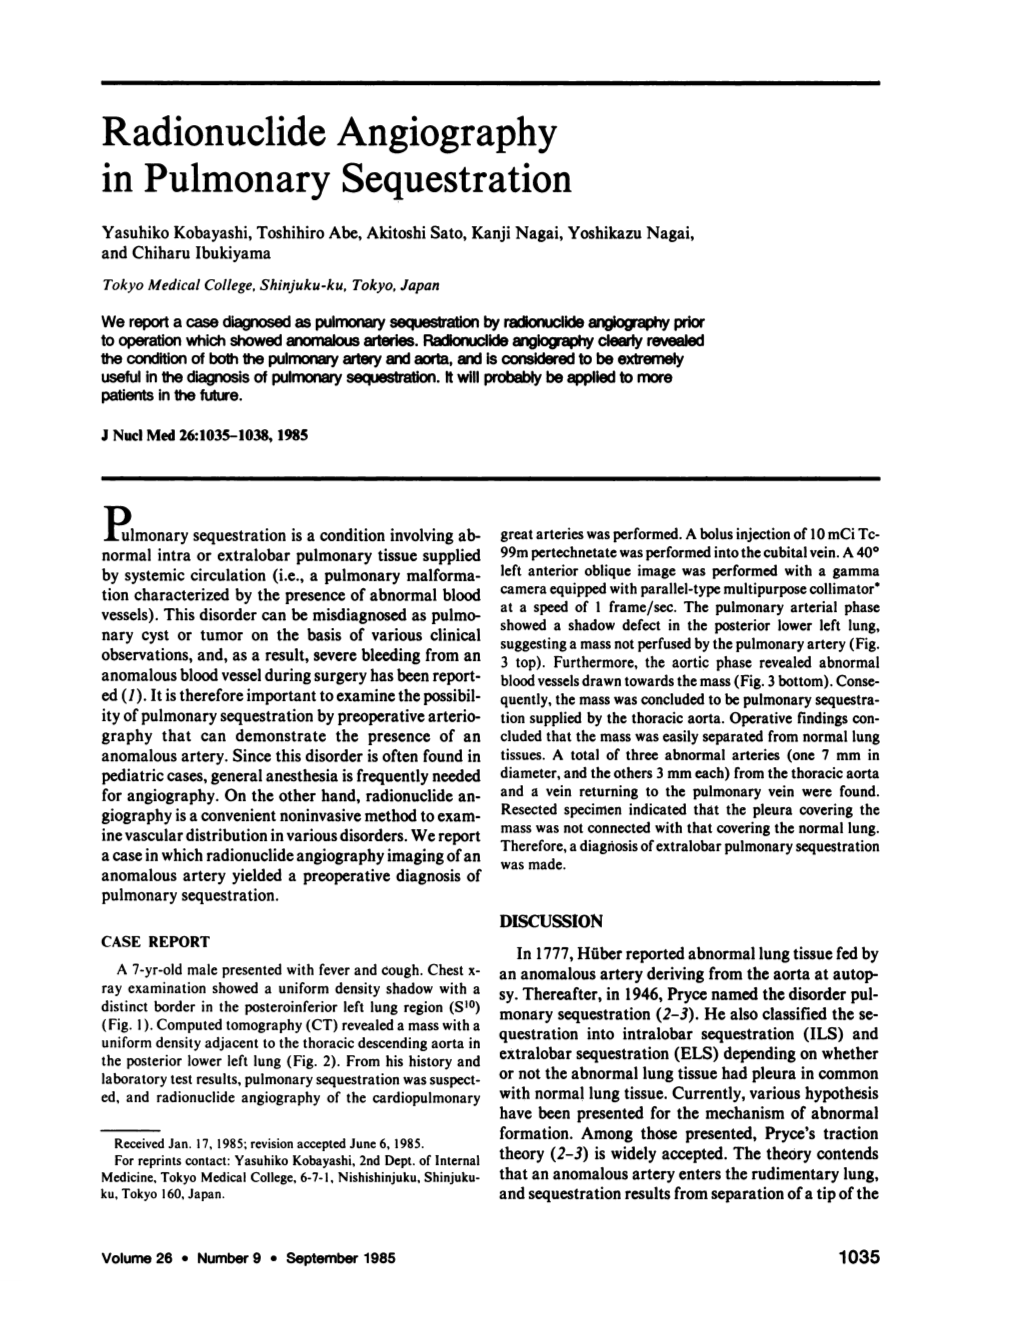 Radionuclide Angiography in Pulmonary Sequestration